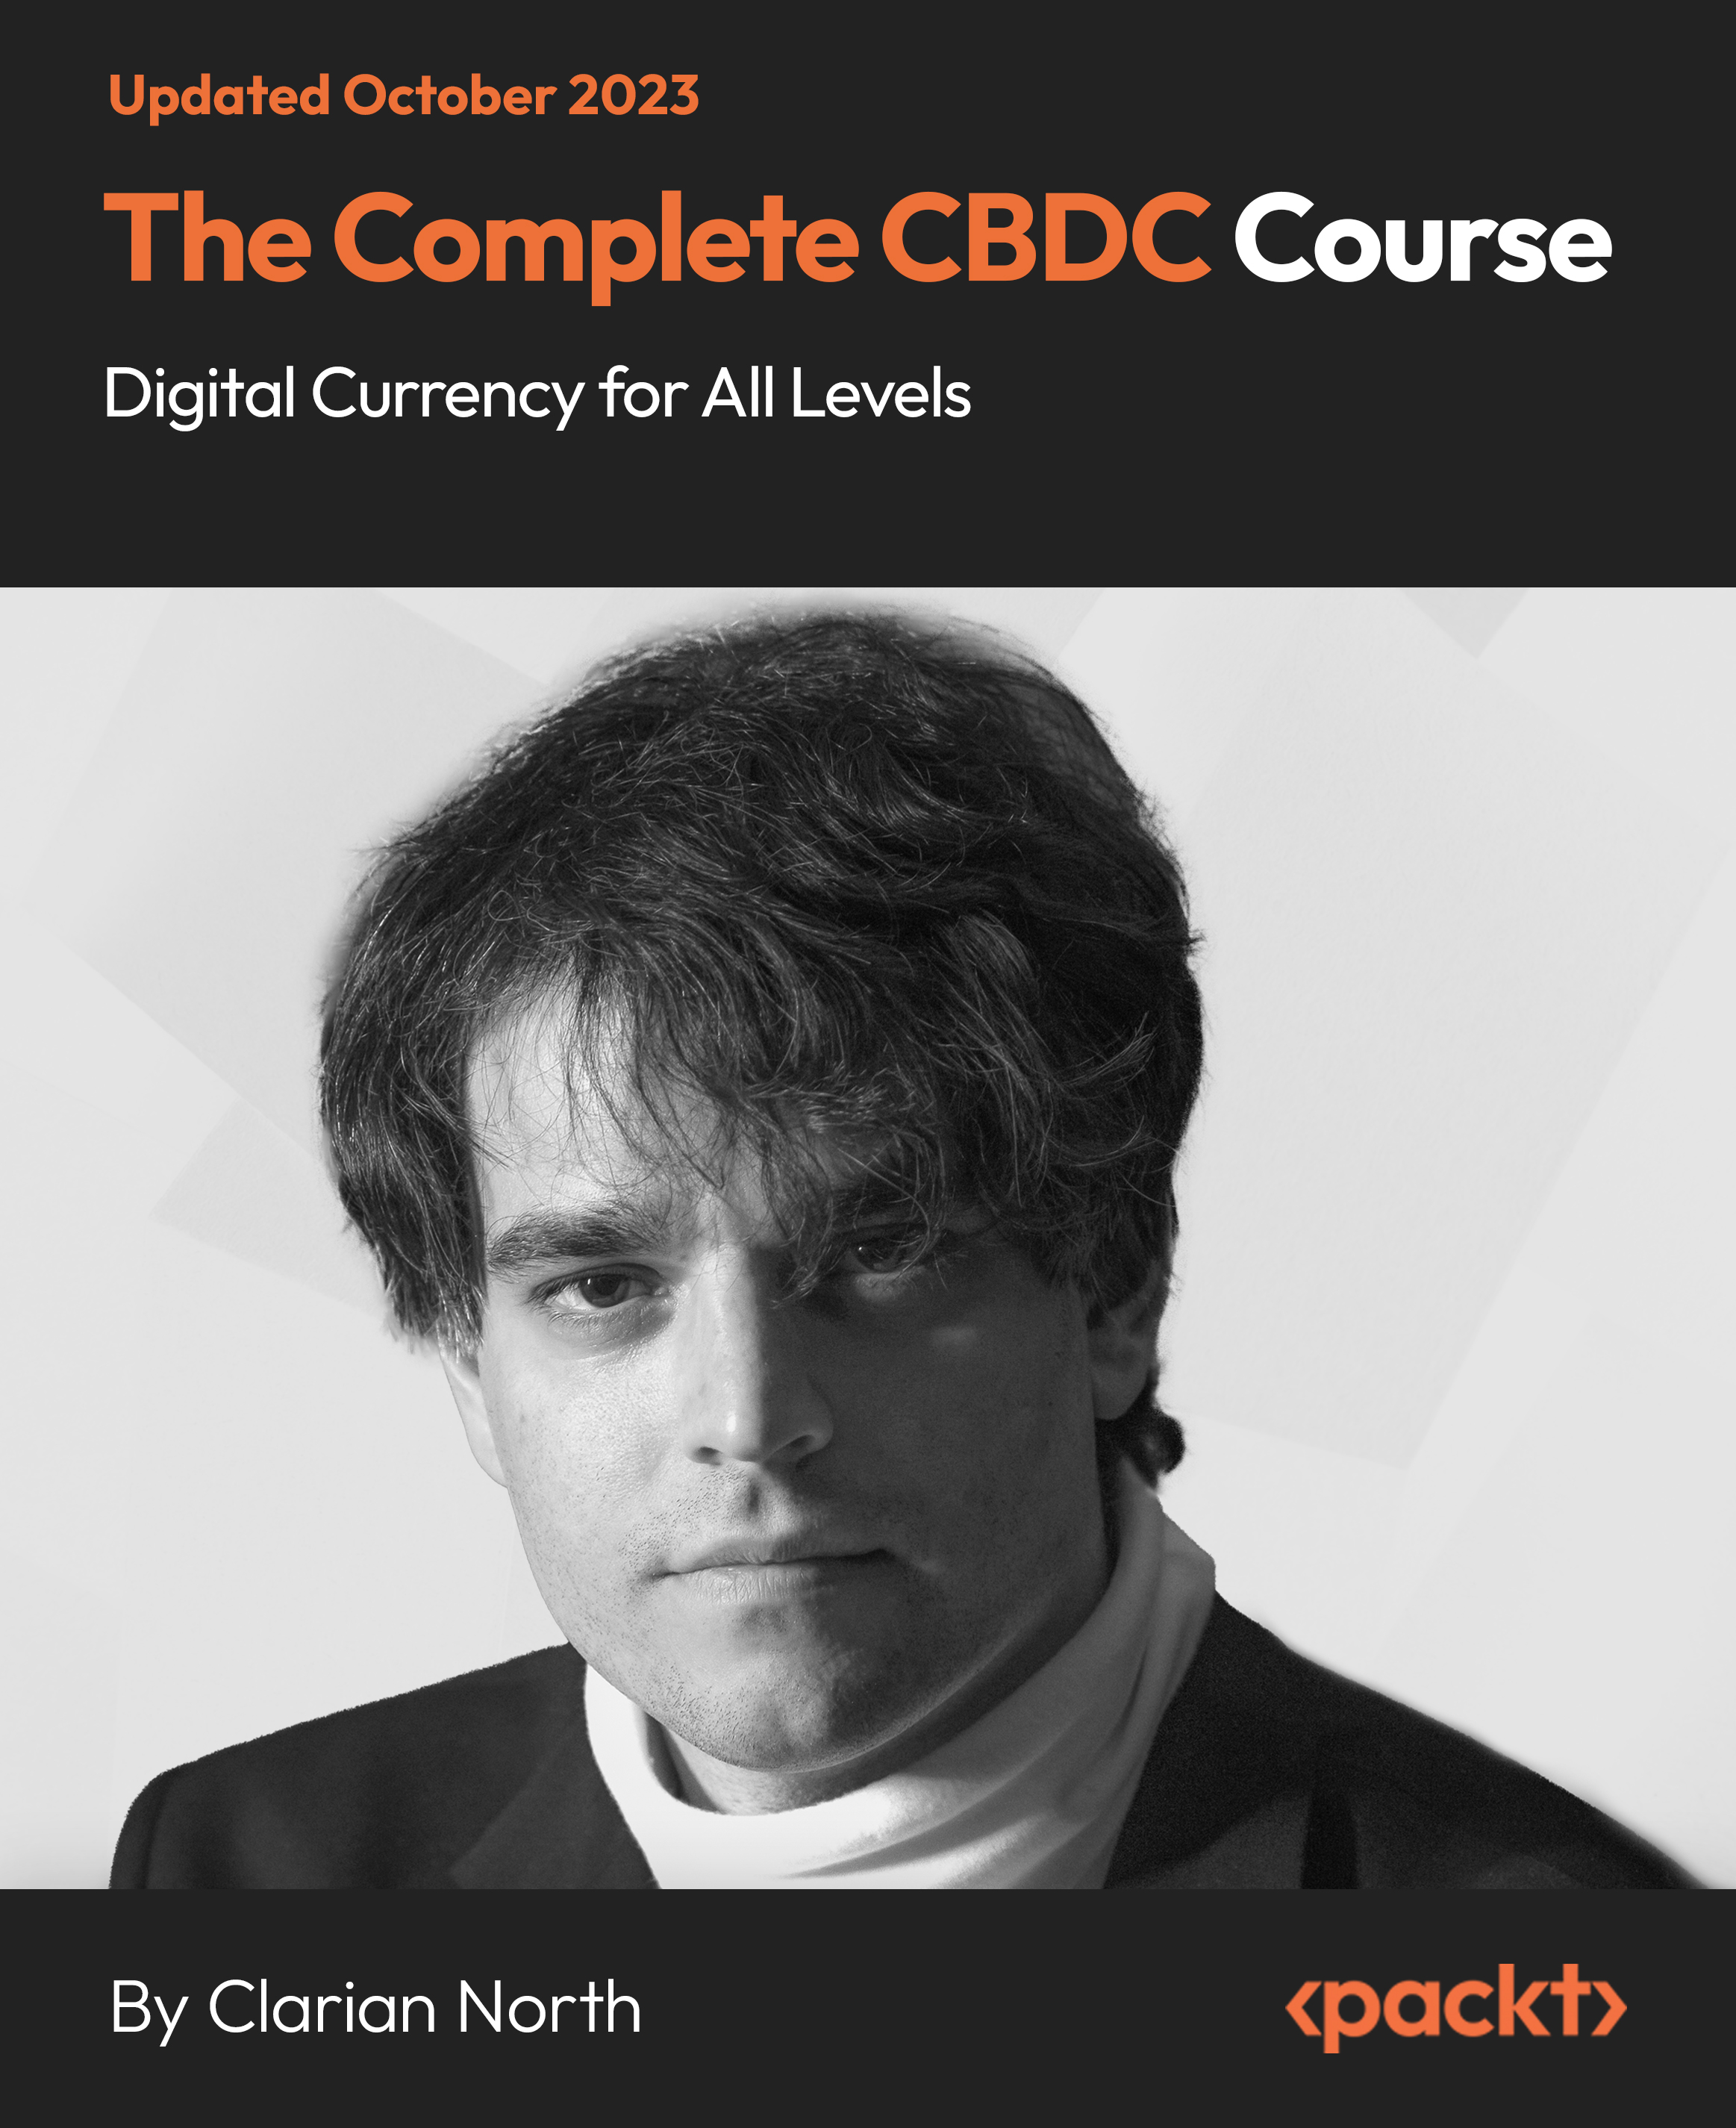 The Complete CBDC Course - Digital Currency for All Levels